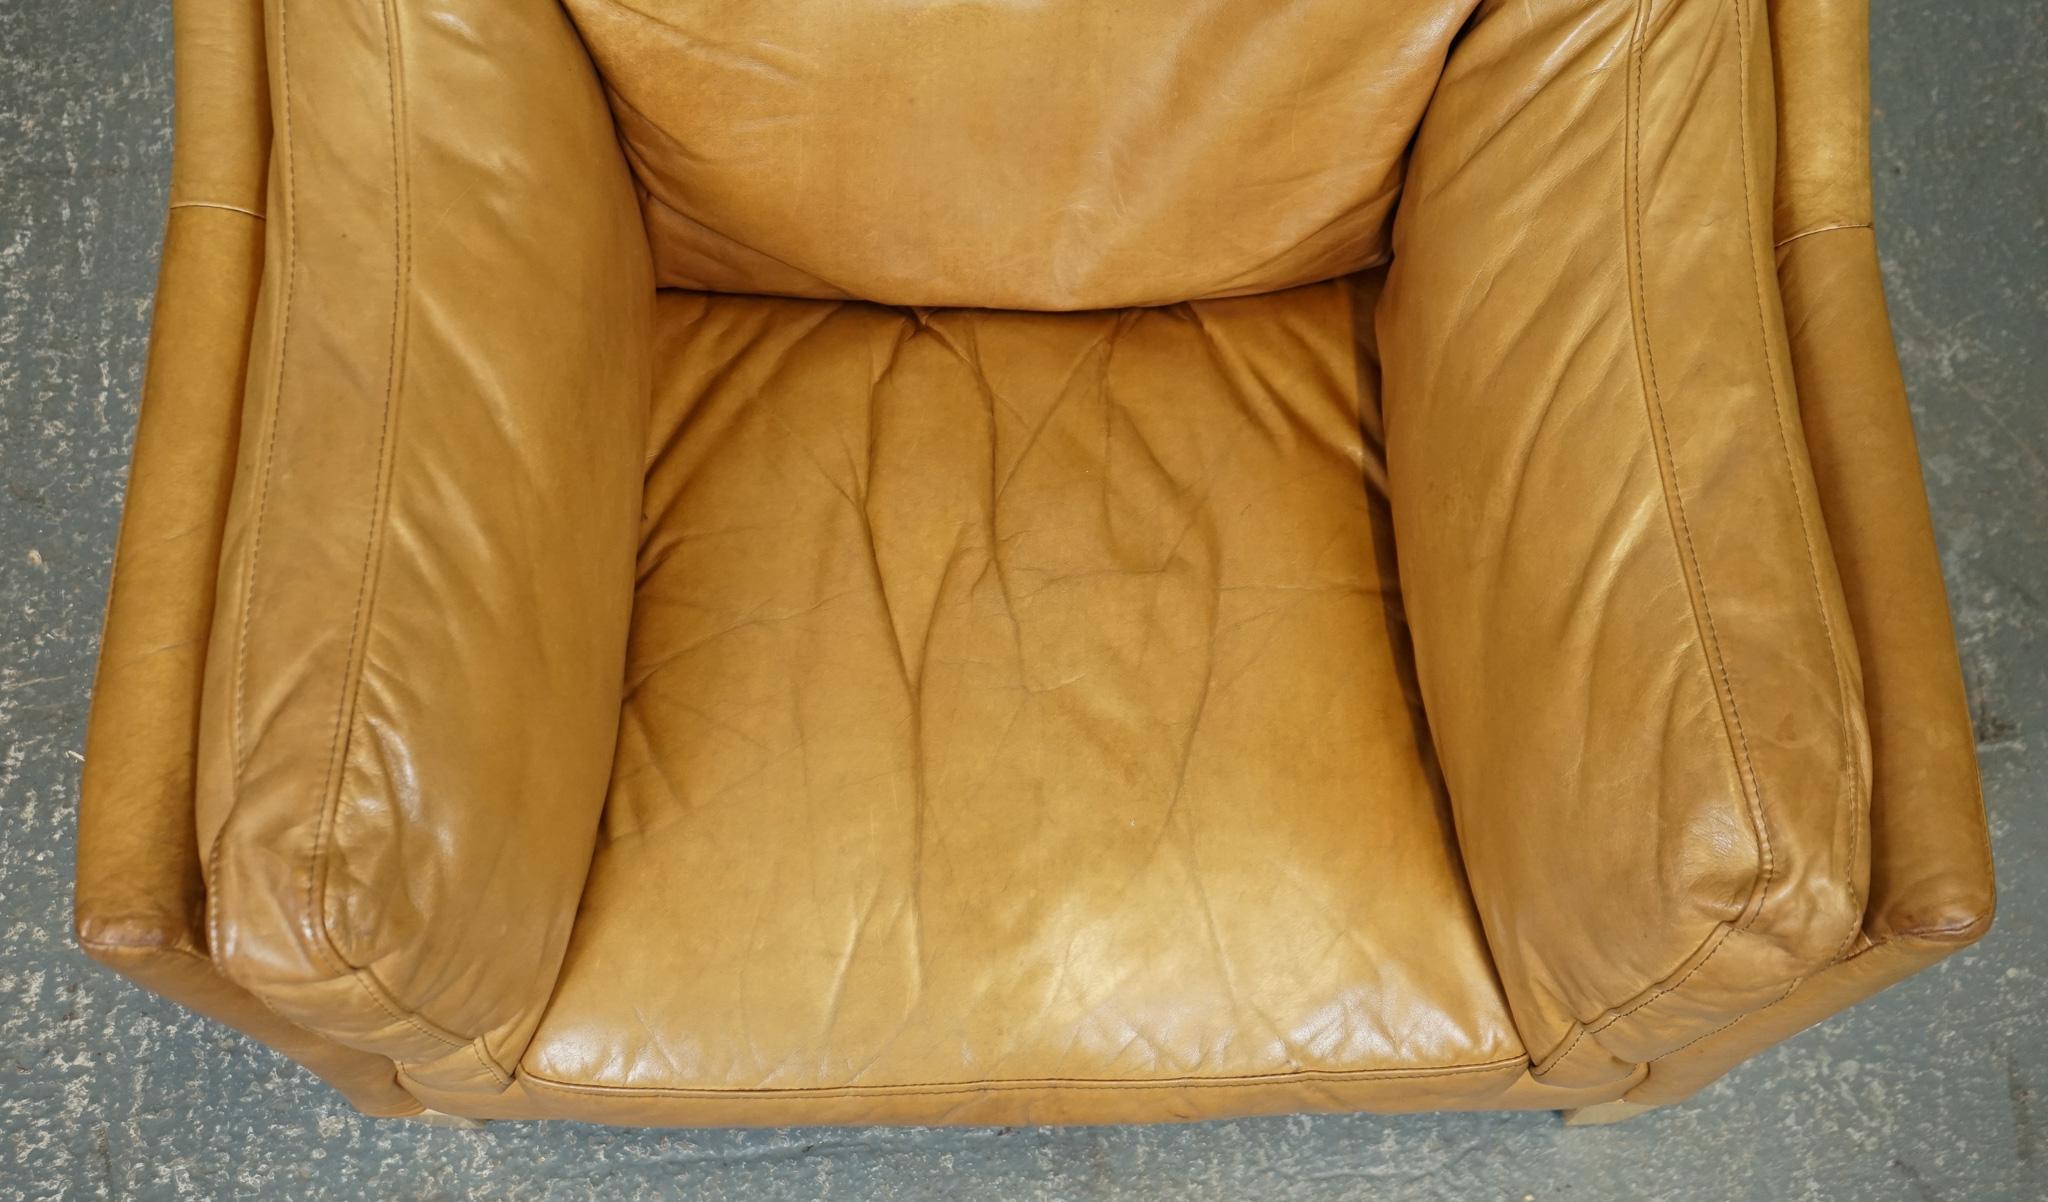 COMPACT AND VERY COMFORTABLE HALO REGGIO Tan LEATHER ARMCHAiR (Leder) im Angebot